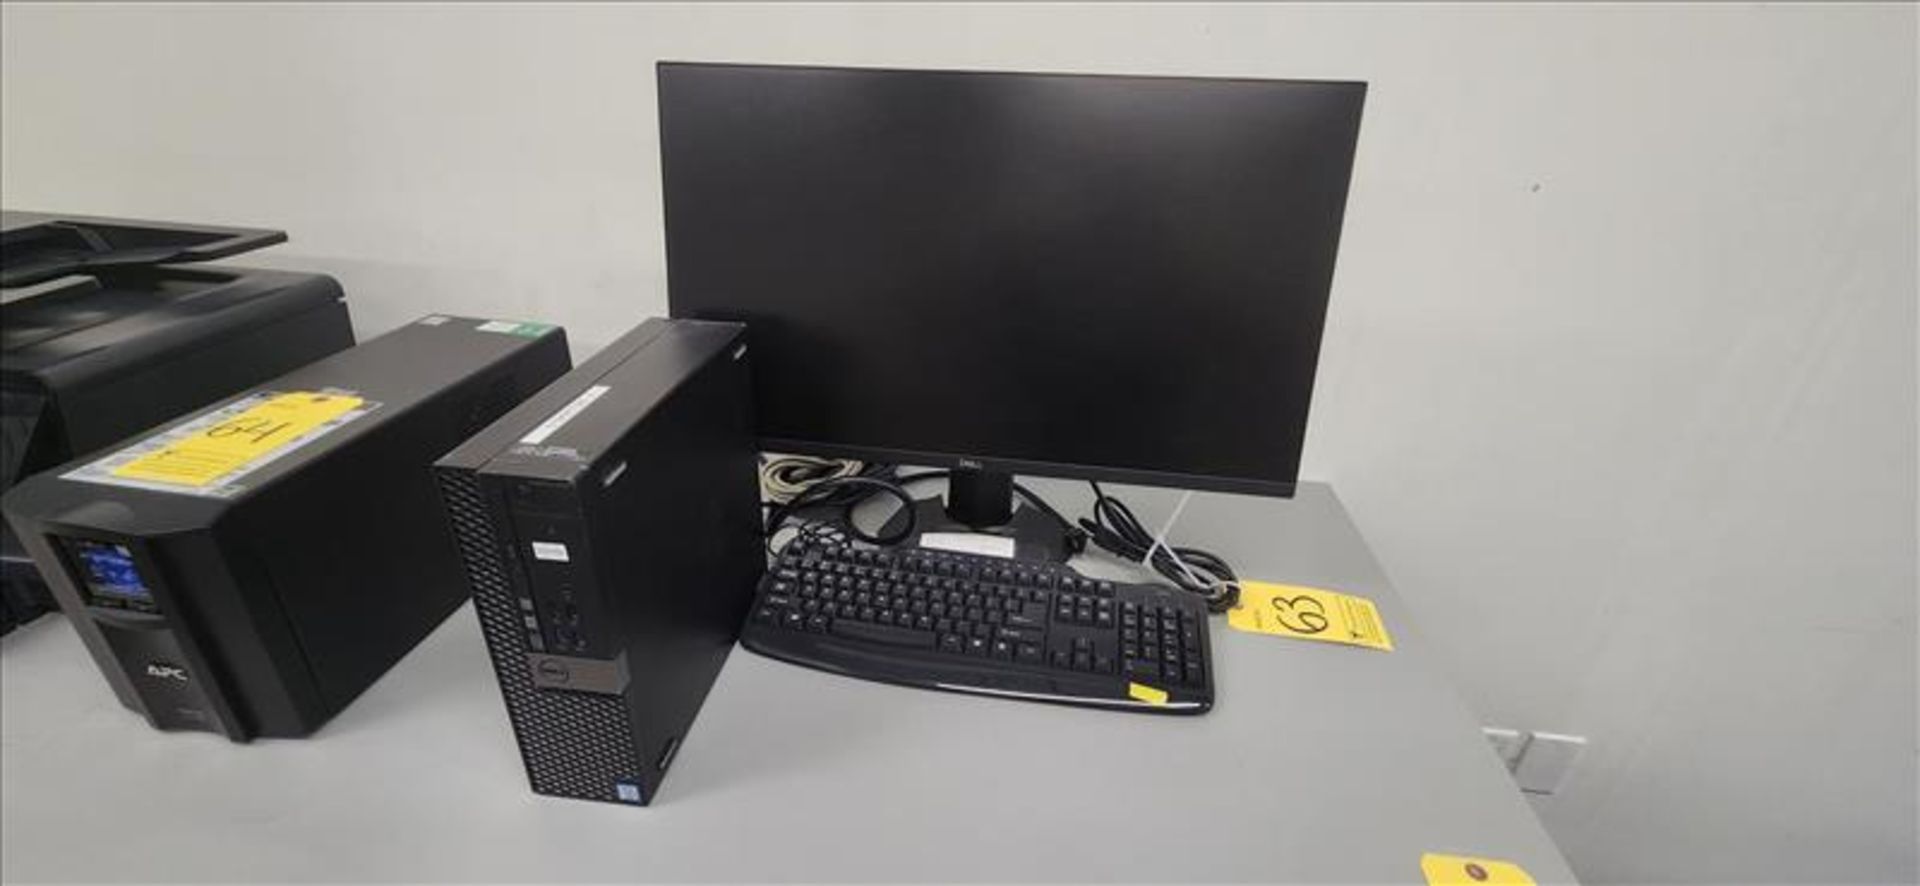 Dell Desktop mod. D11S c/w monitor and keyboard